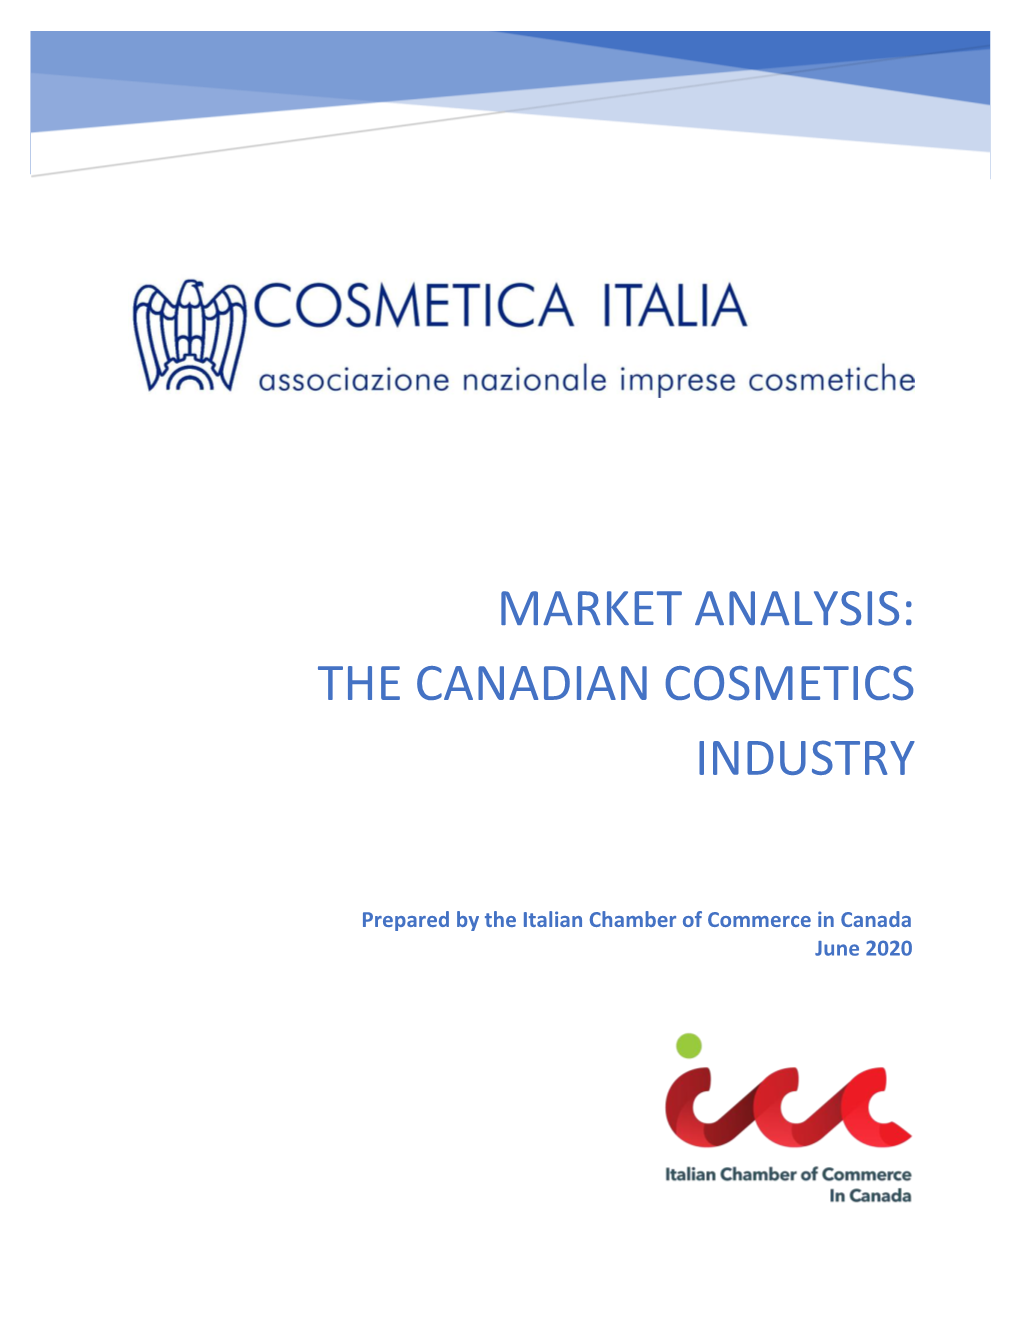 The Canadian Cosmetics Industry